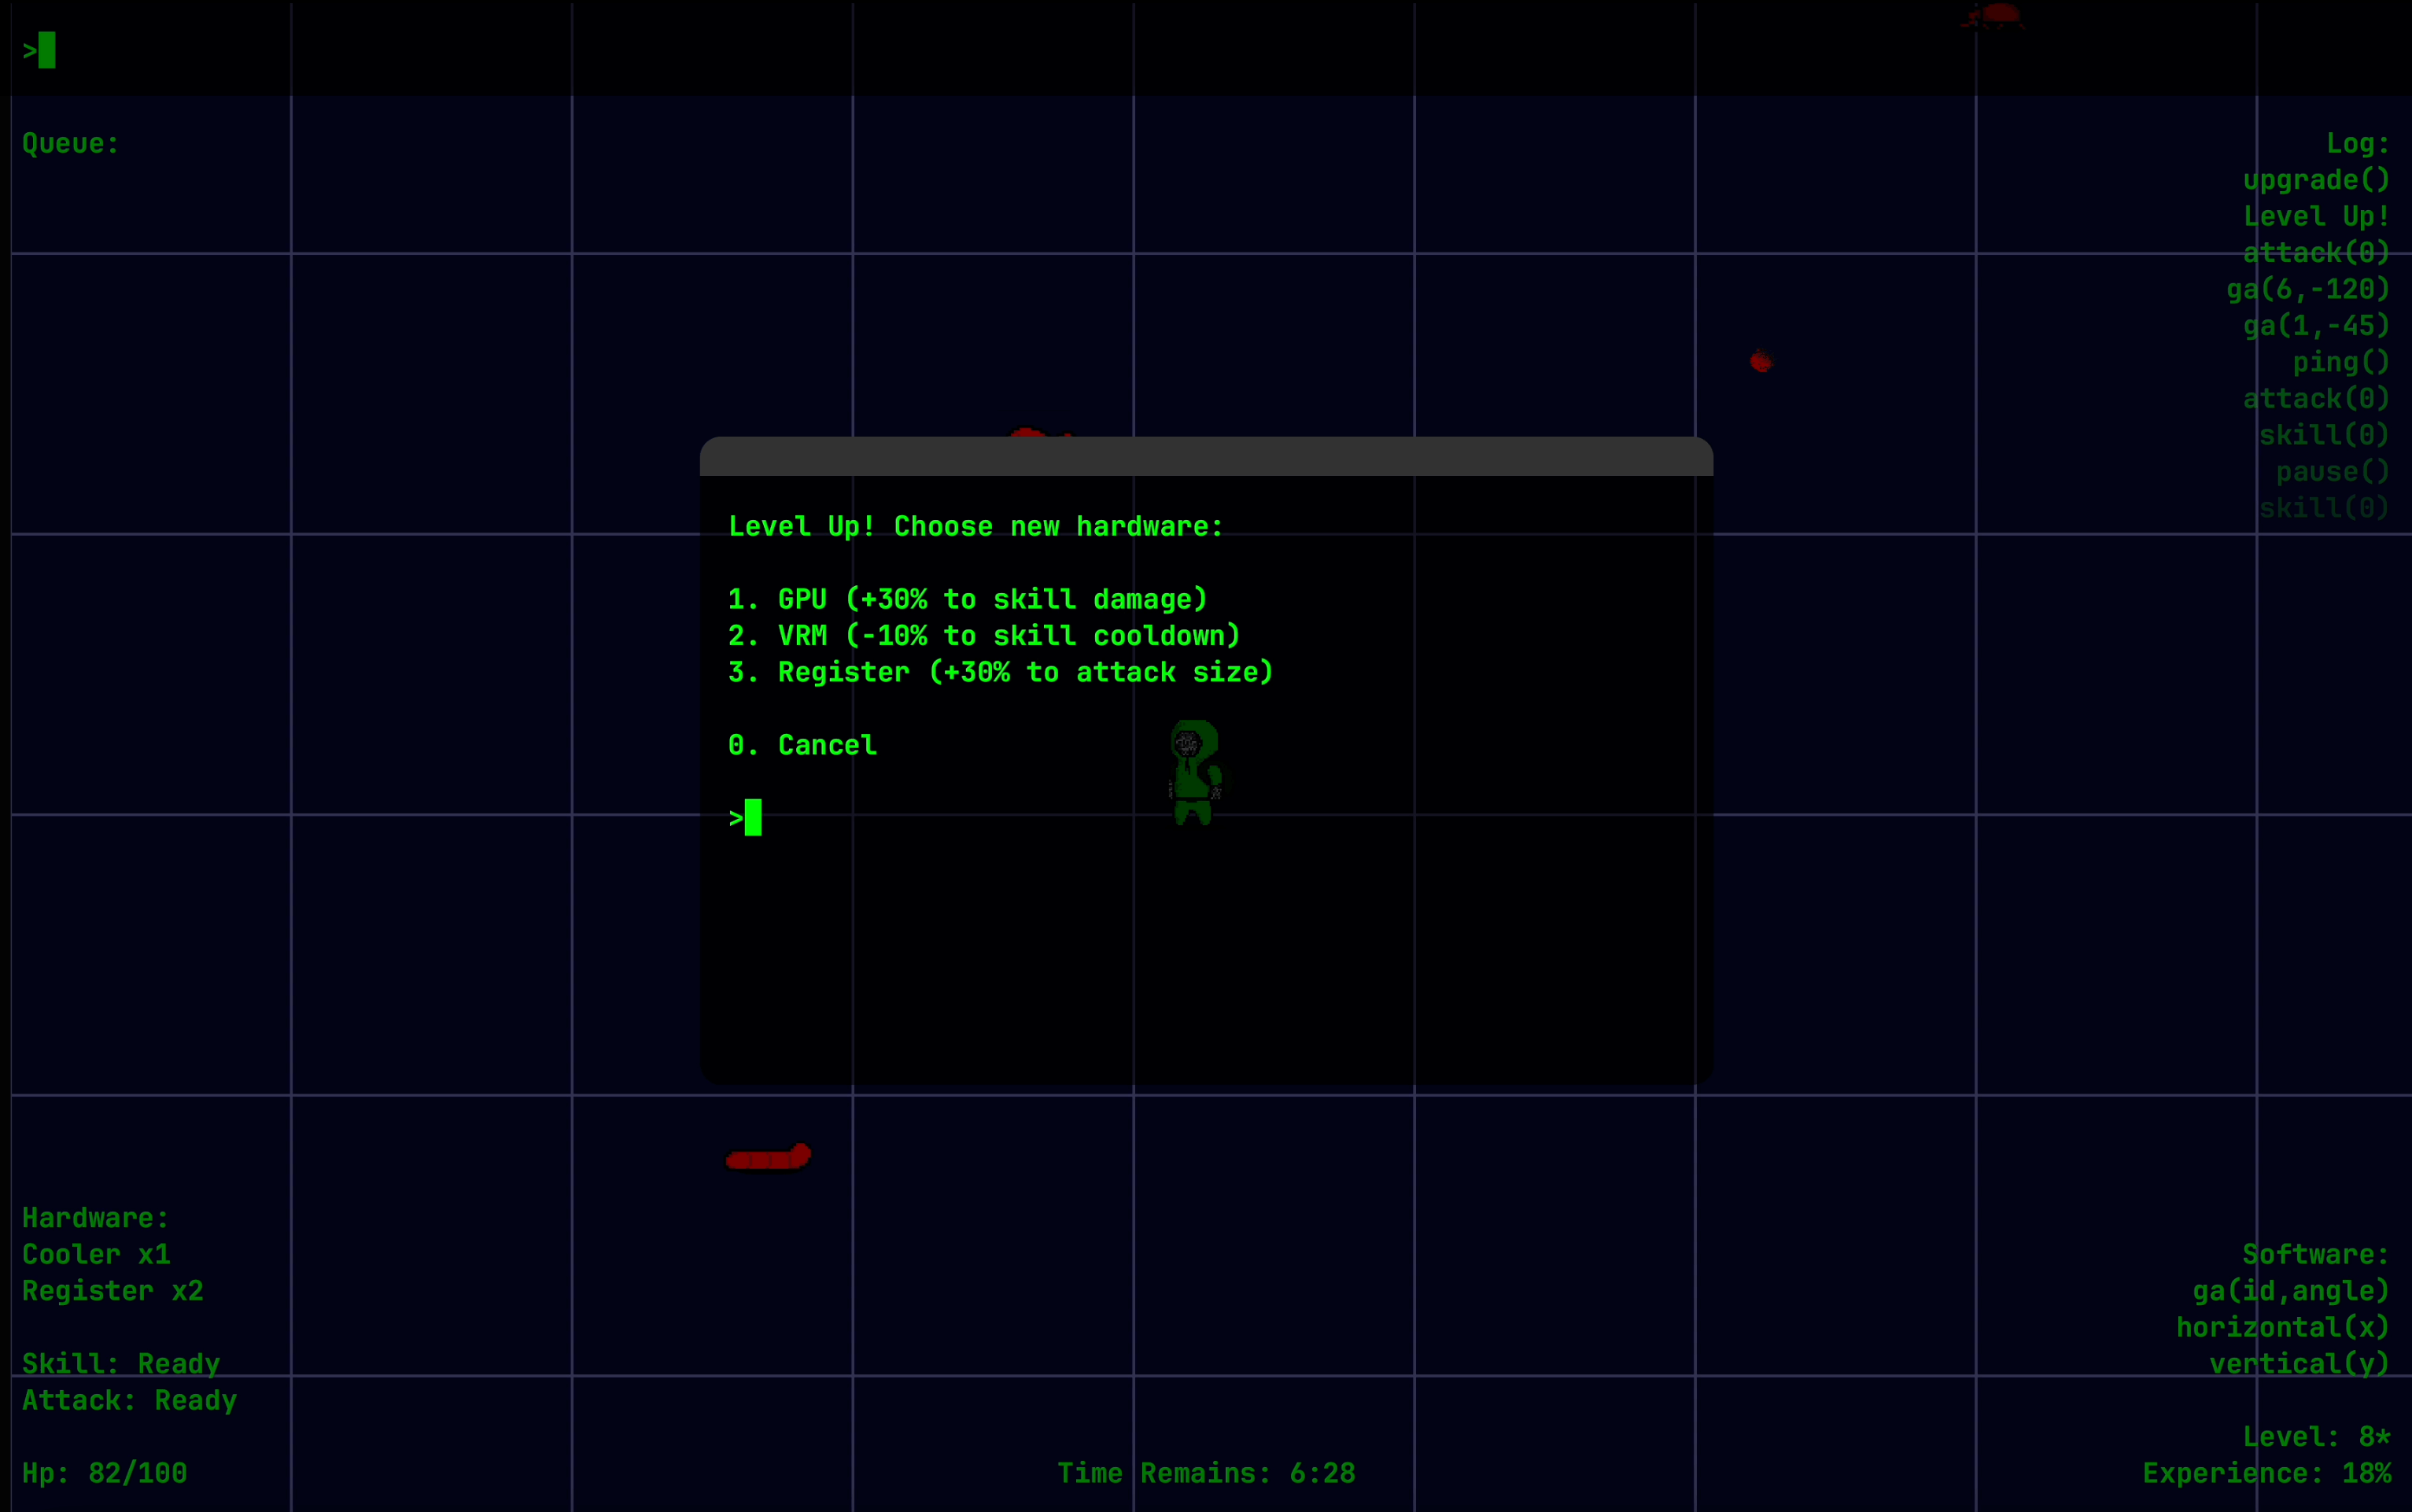 Screenshot of a level up window asking the player if they want new GPU, VRM or register